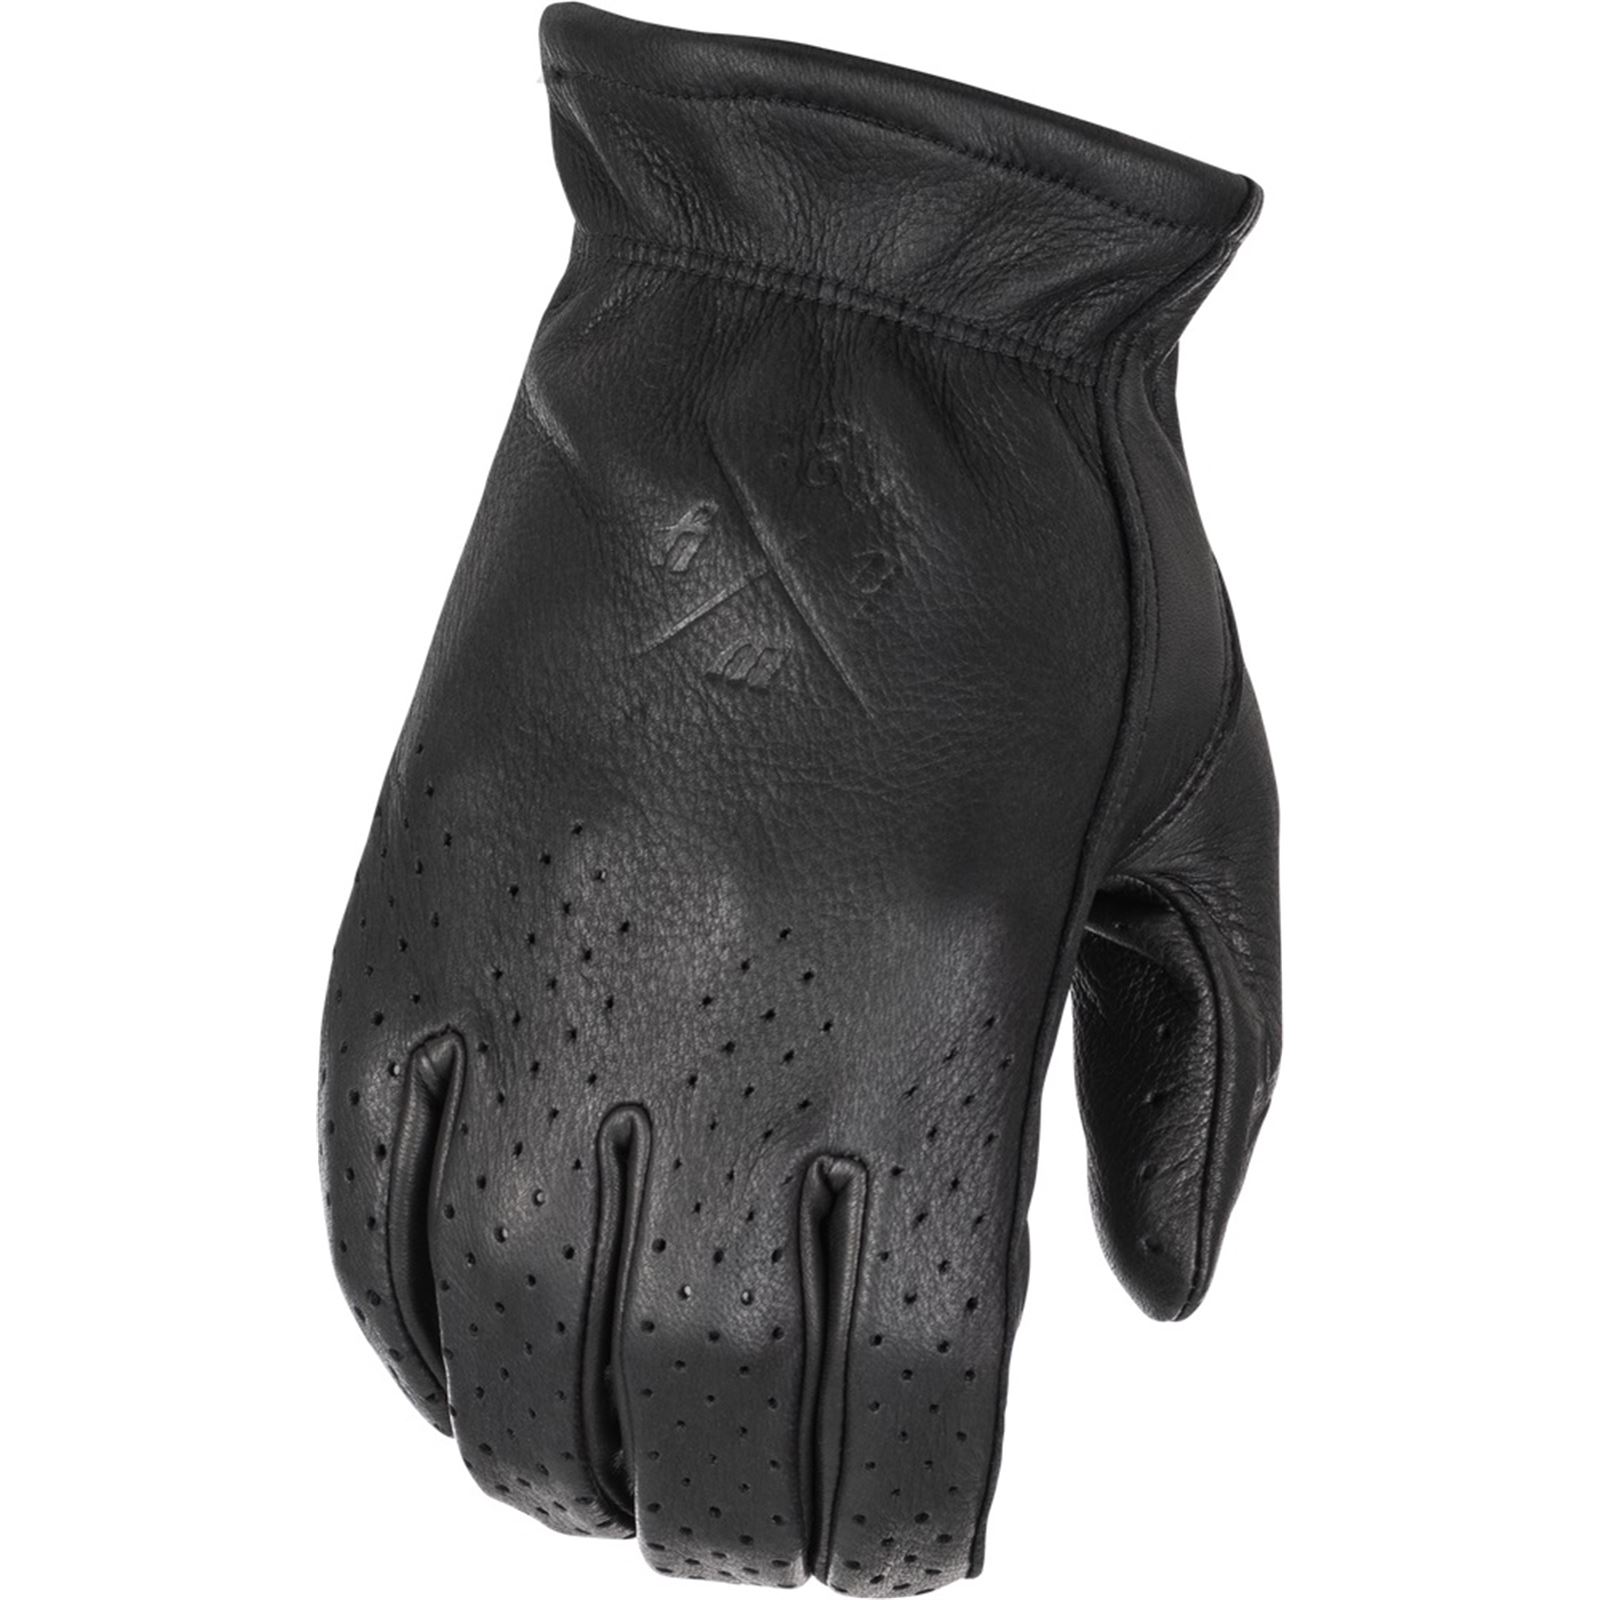 Highway 21 Louie Perforated Gloves - Black - X-Small